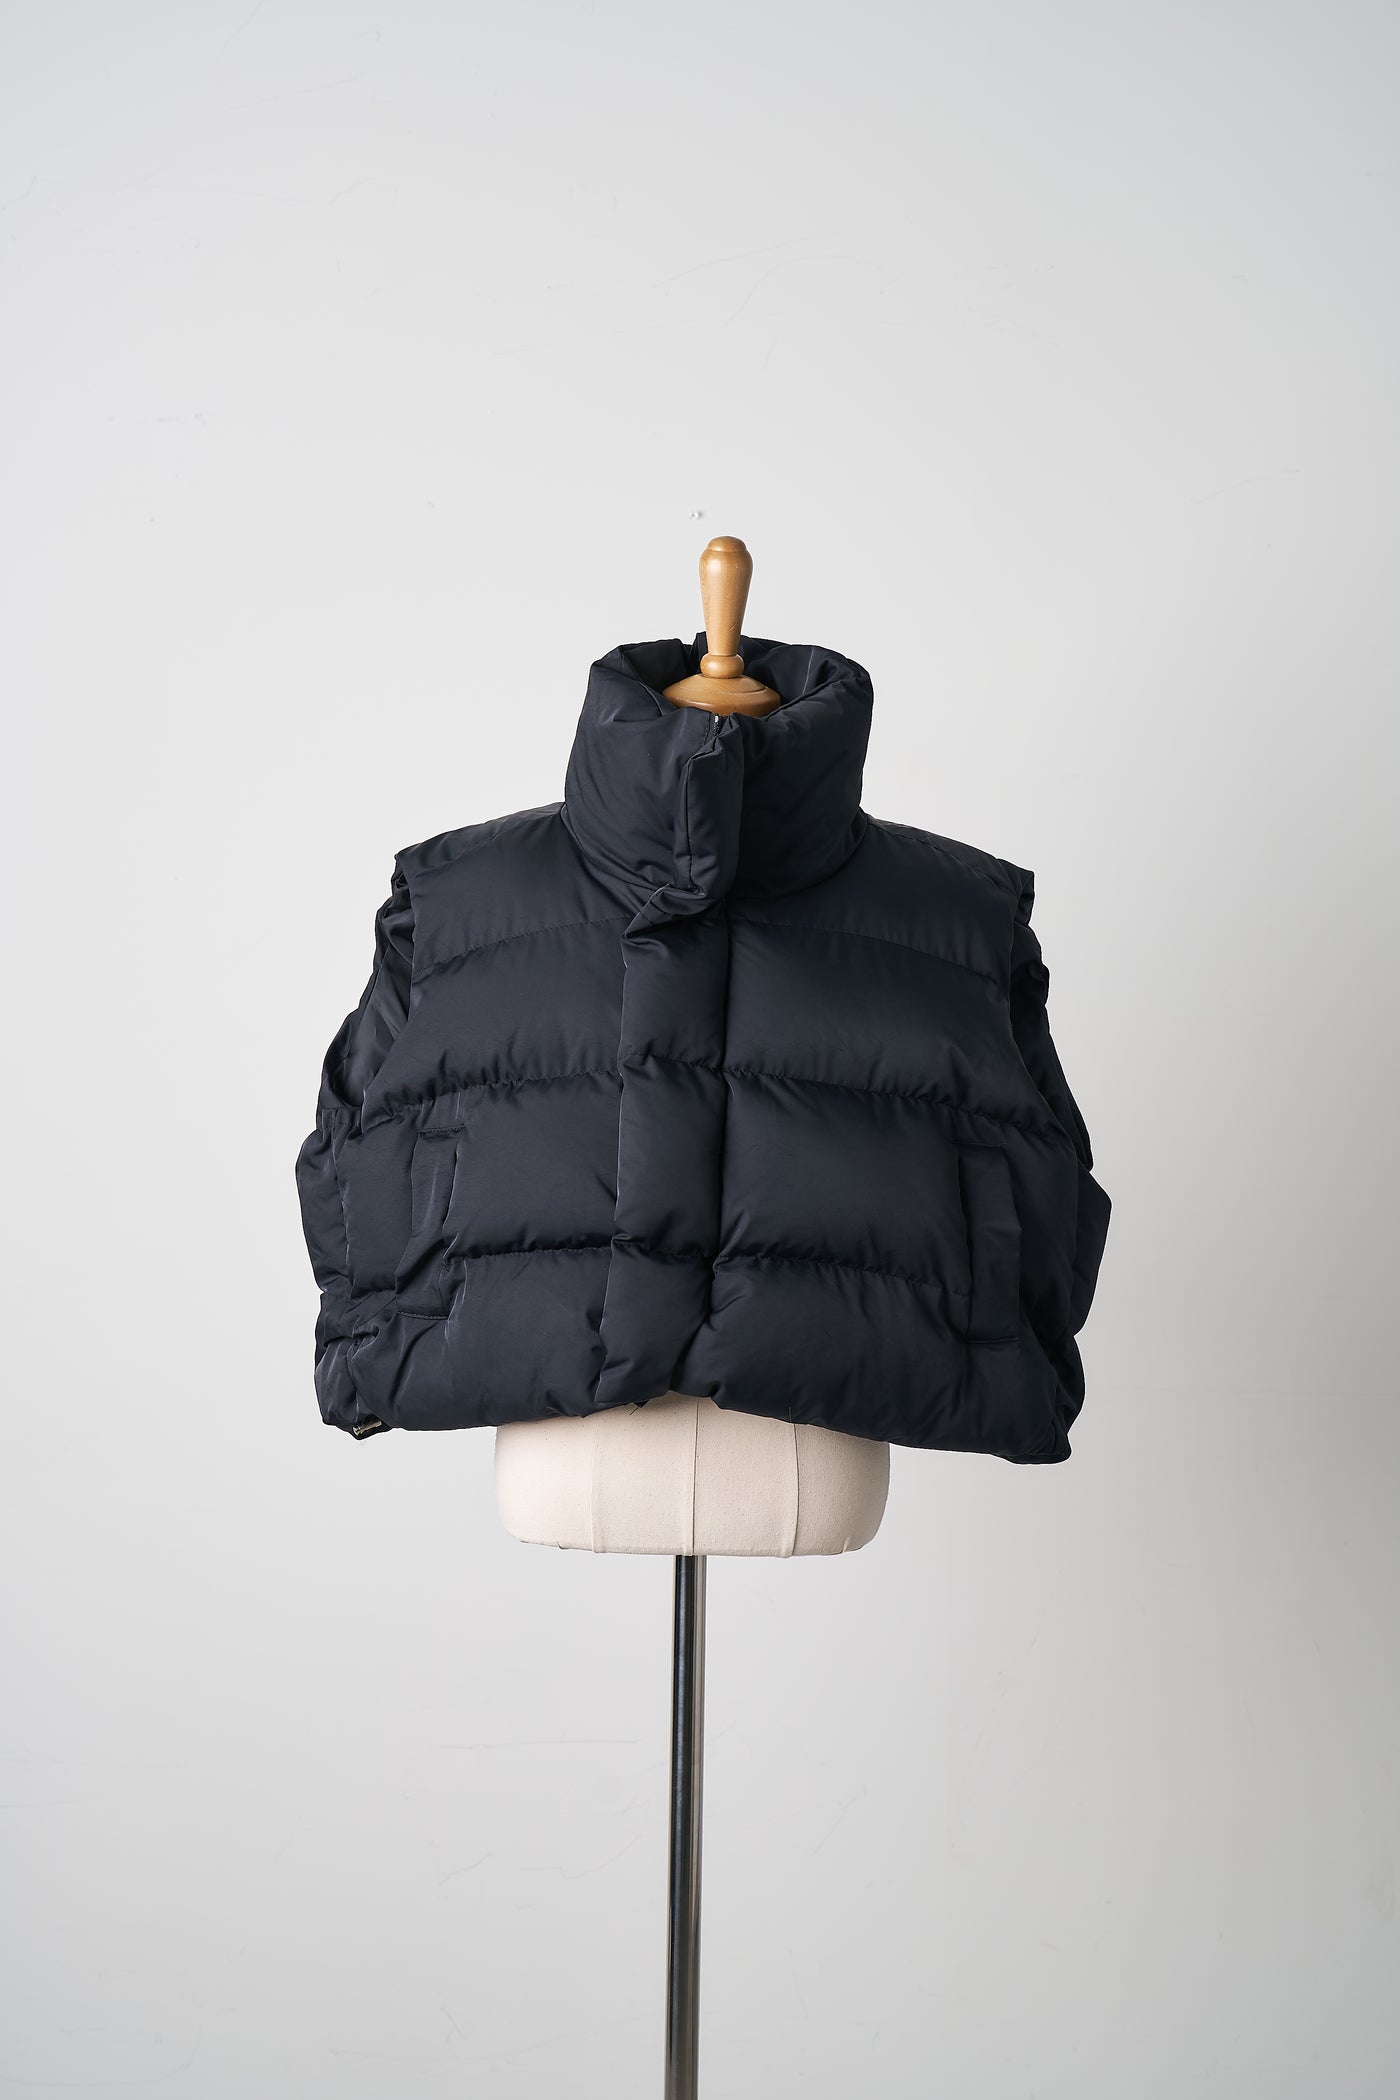 STORETS.us Phoebe Cropped Puffer Vest